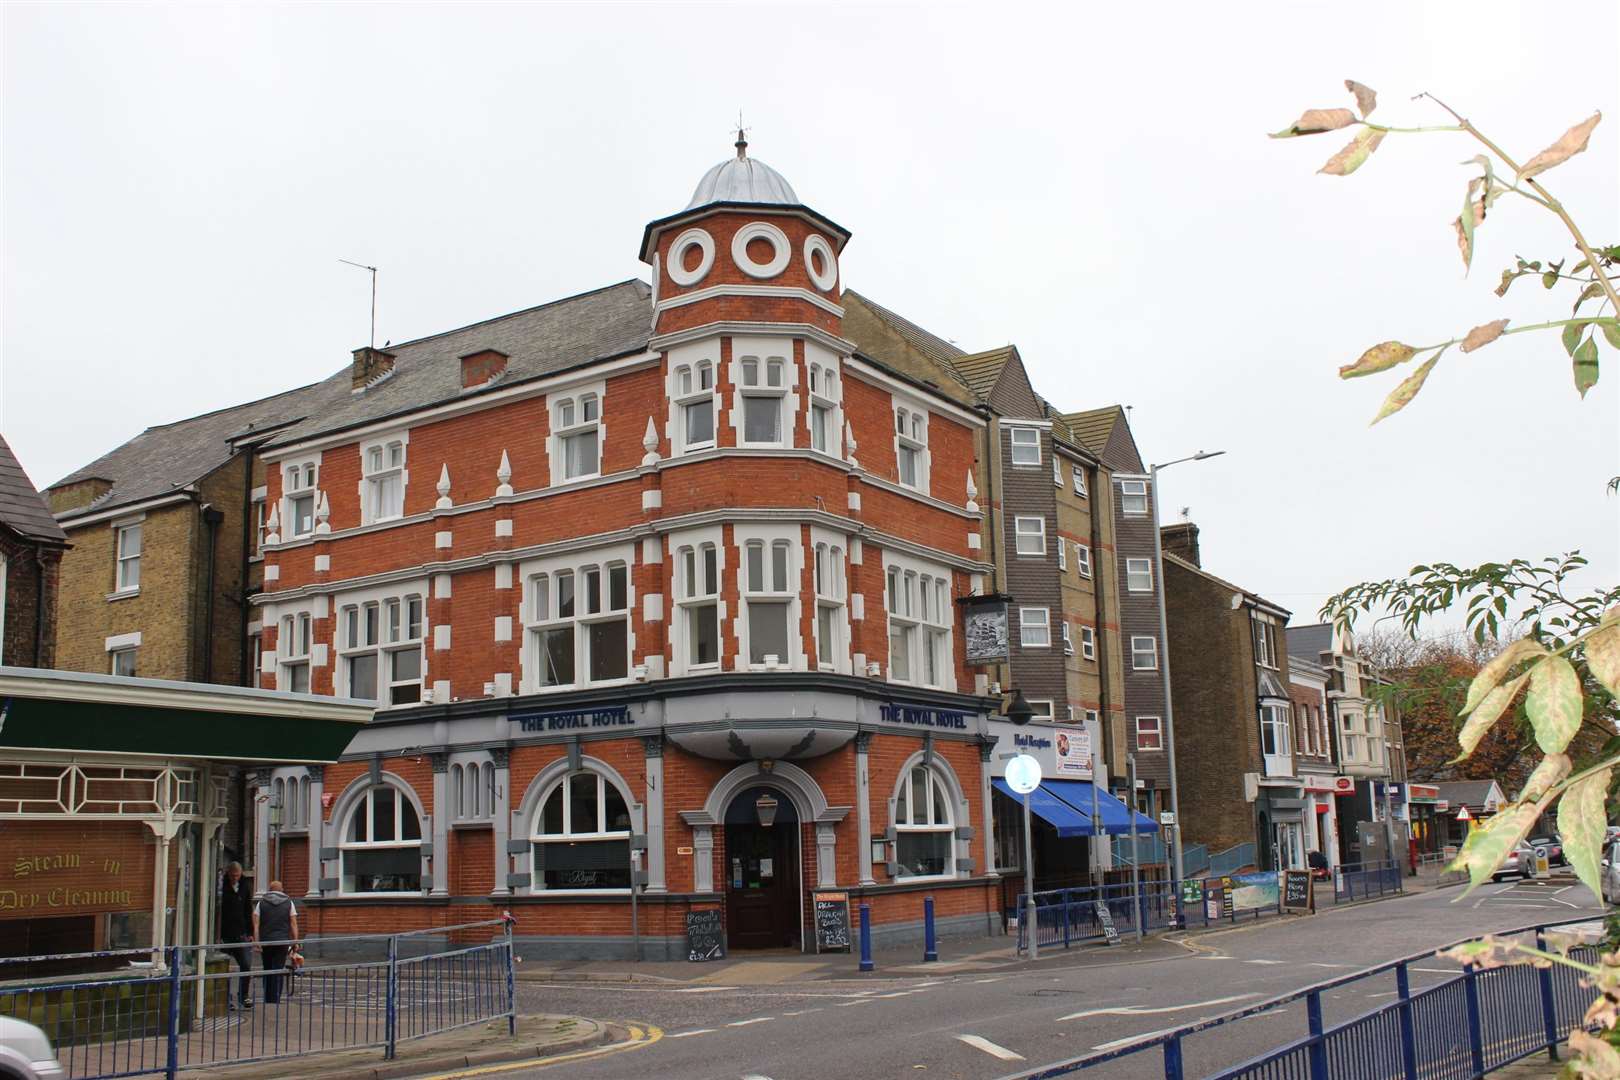 The Royal Hotel at the junction of Sheerness Broadway and Royal Road